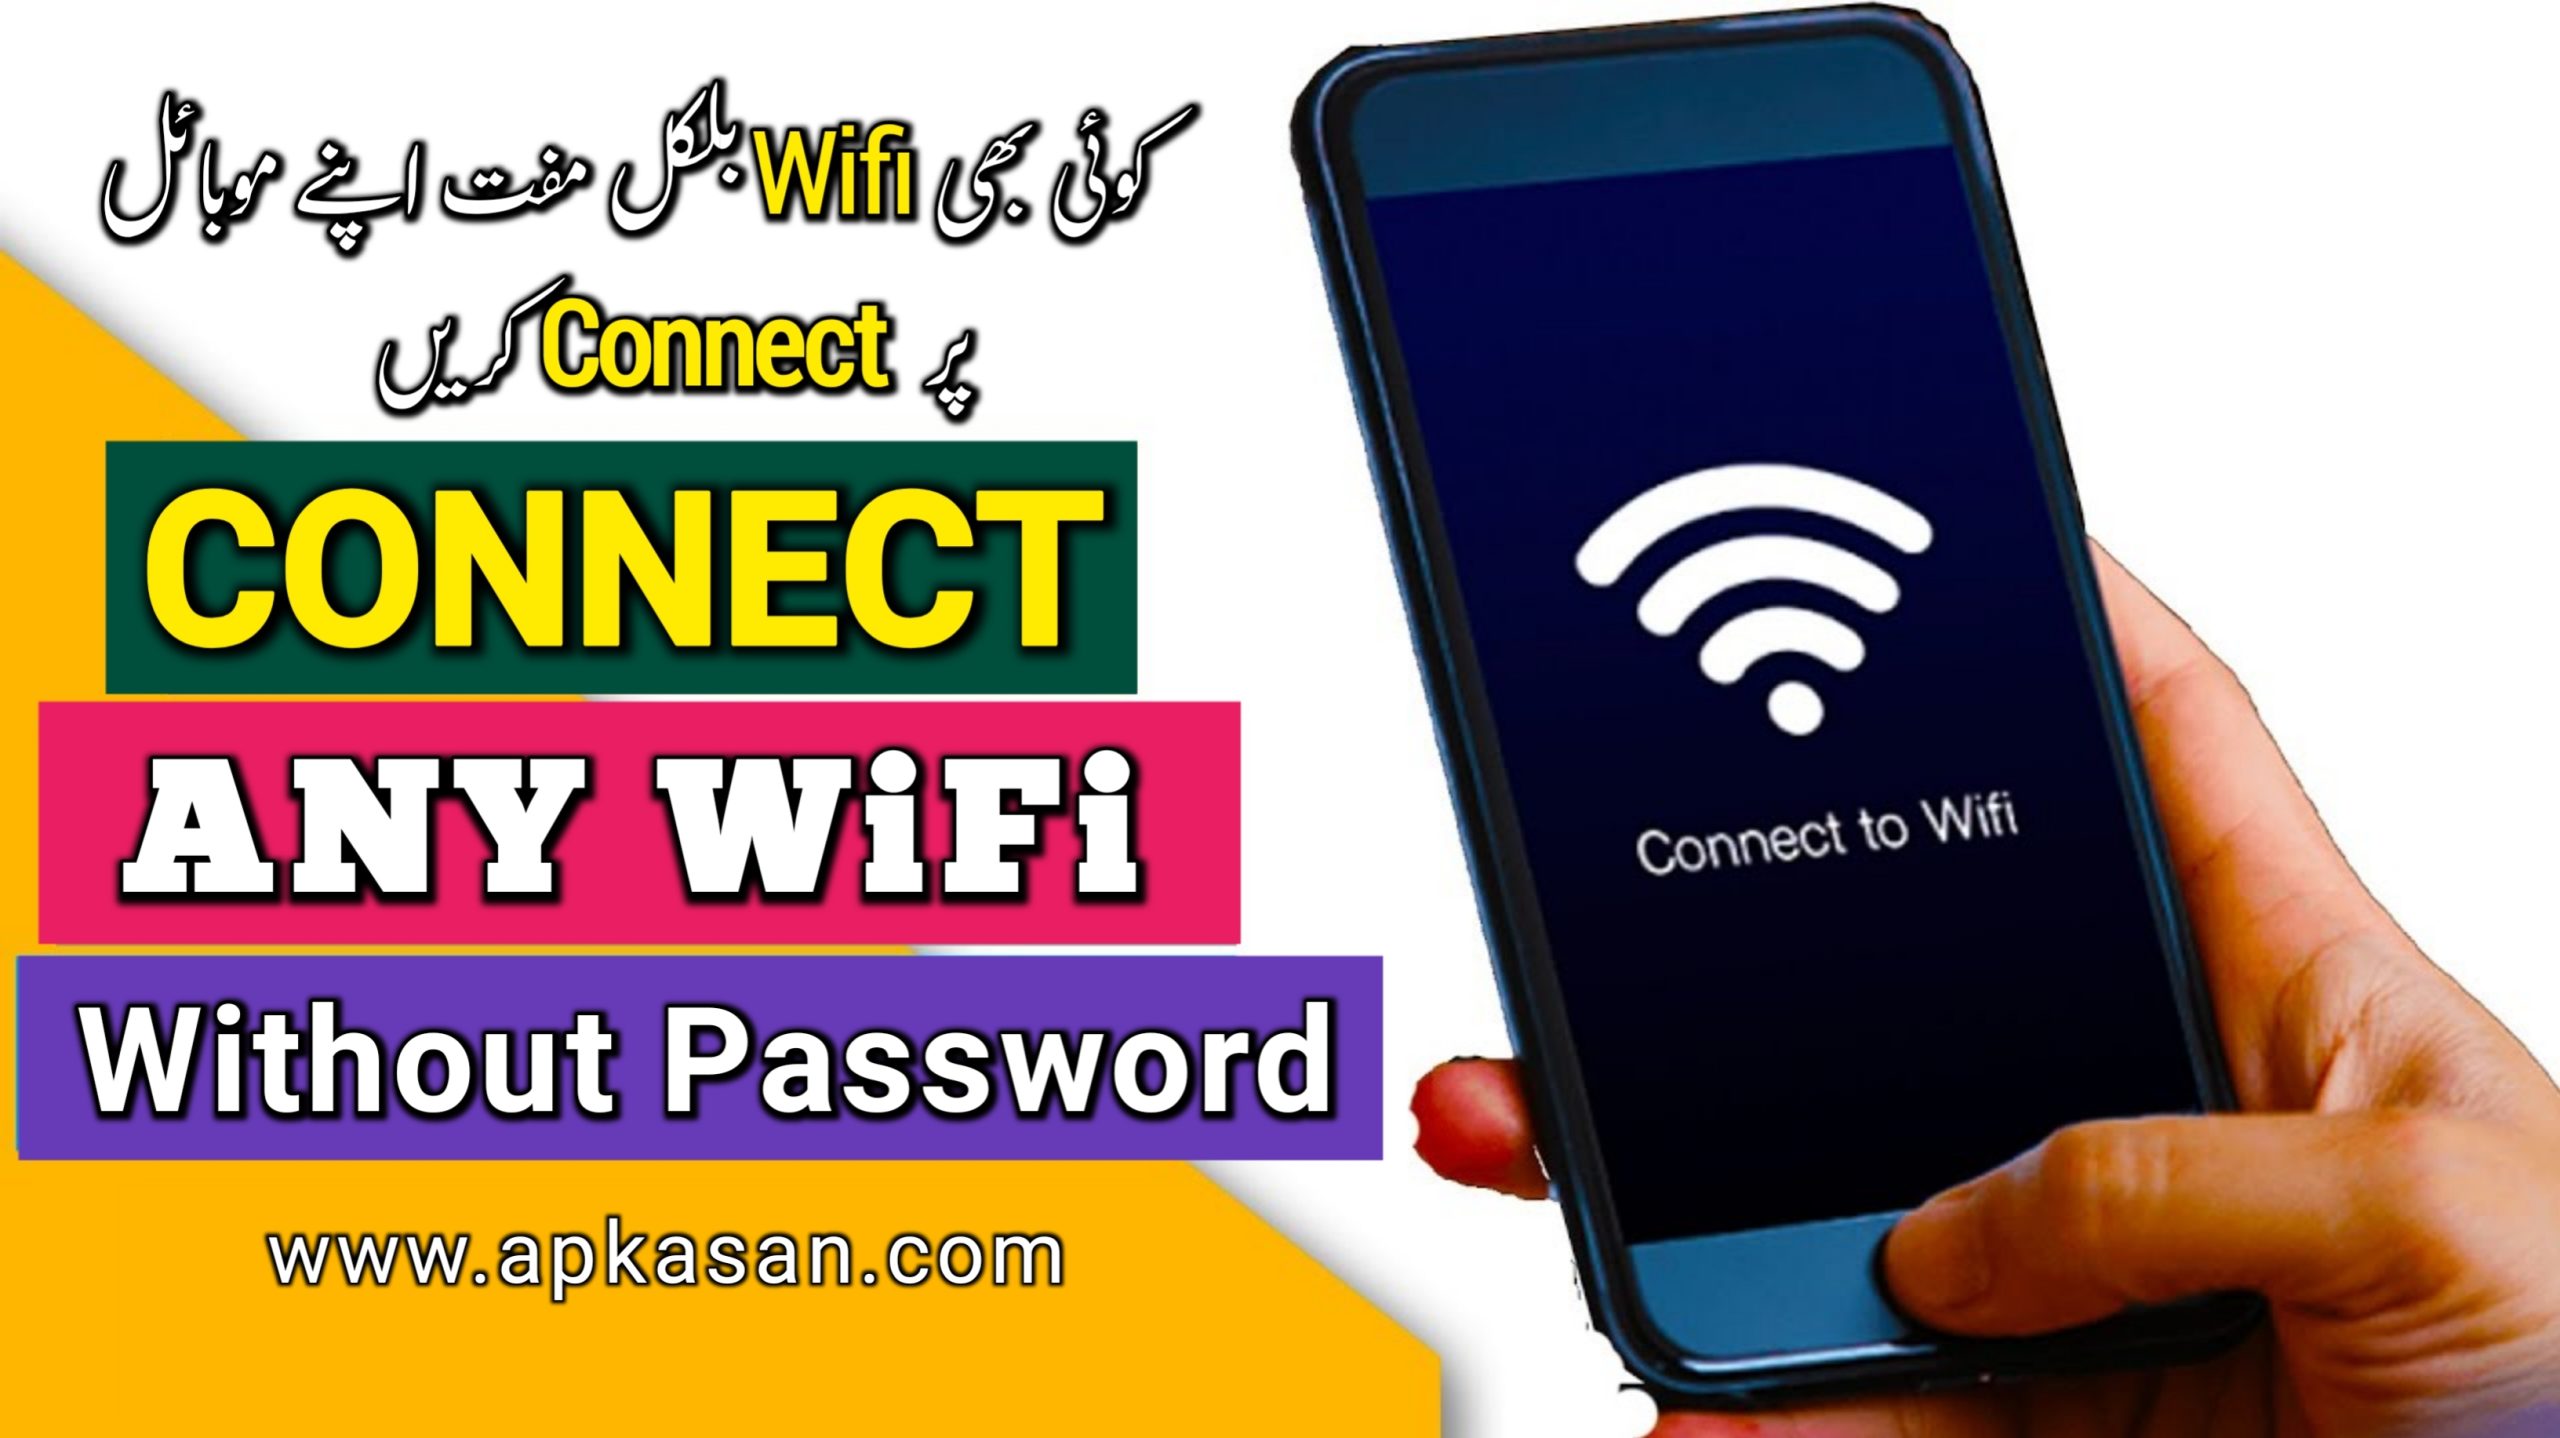 How to connect any Wi-Fi without password